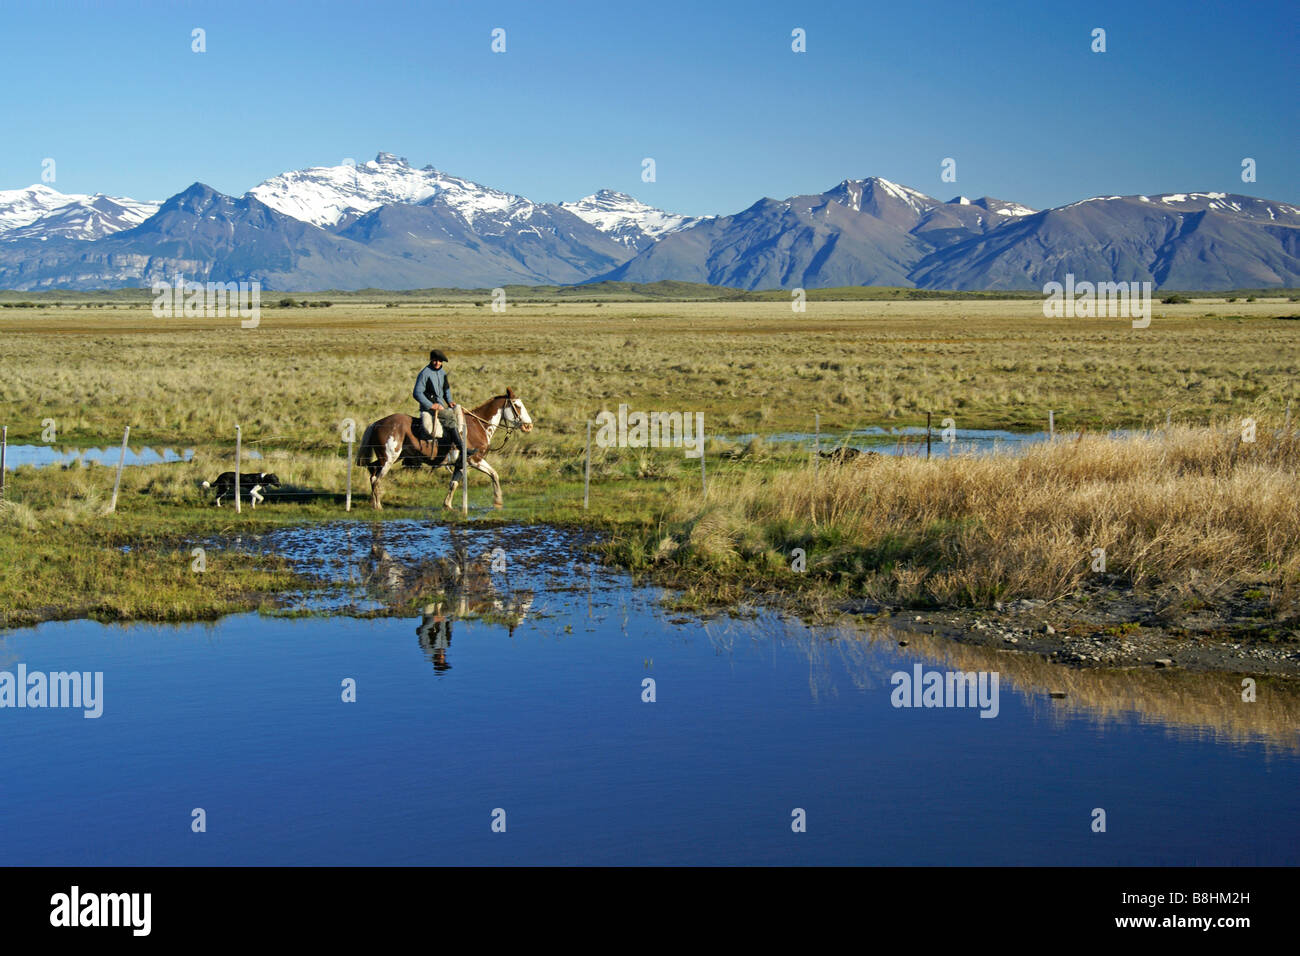 Gaucho riding the fence, Patagonia, Argentina Stock Photo